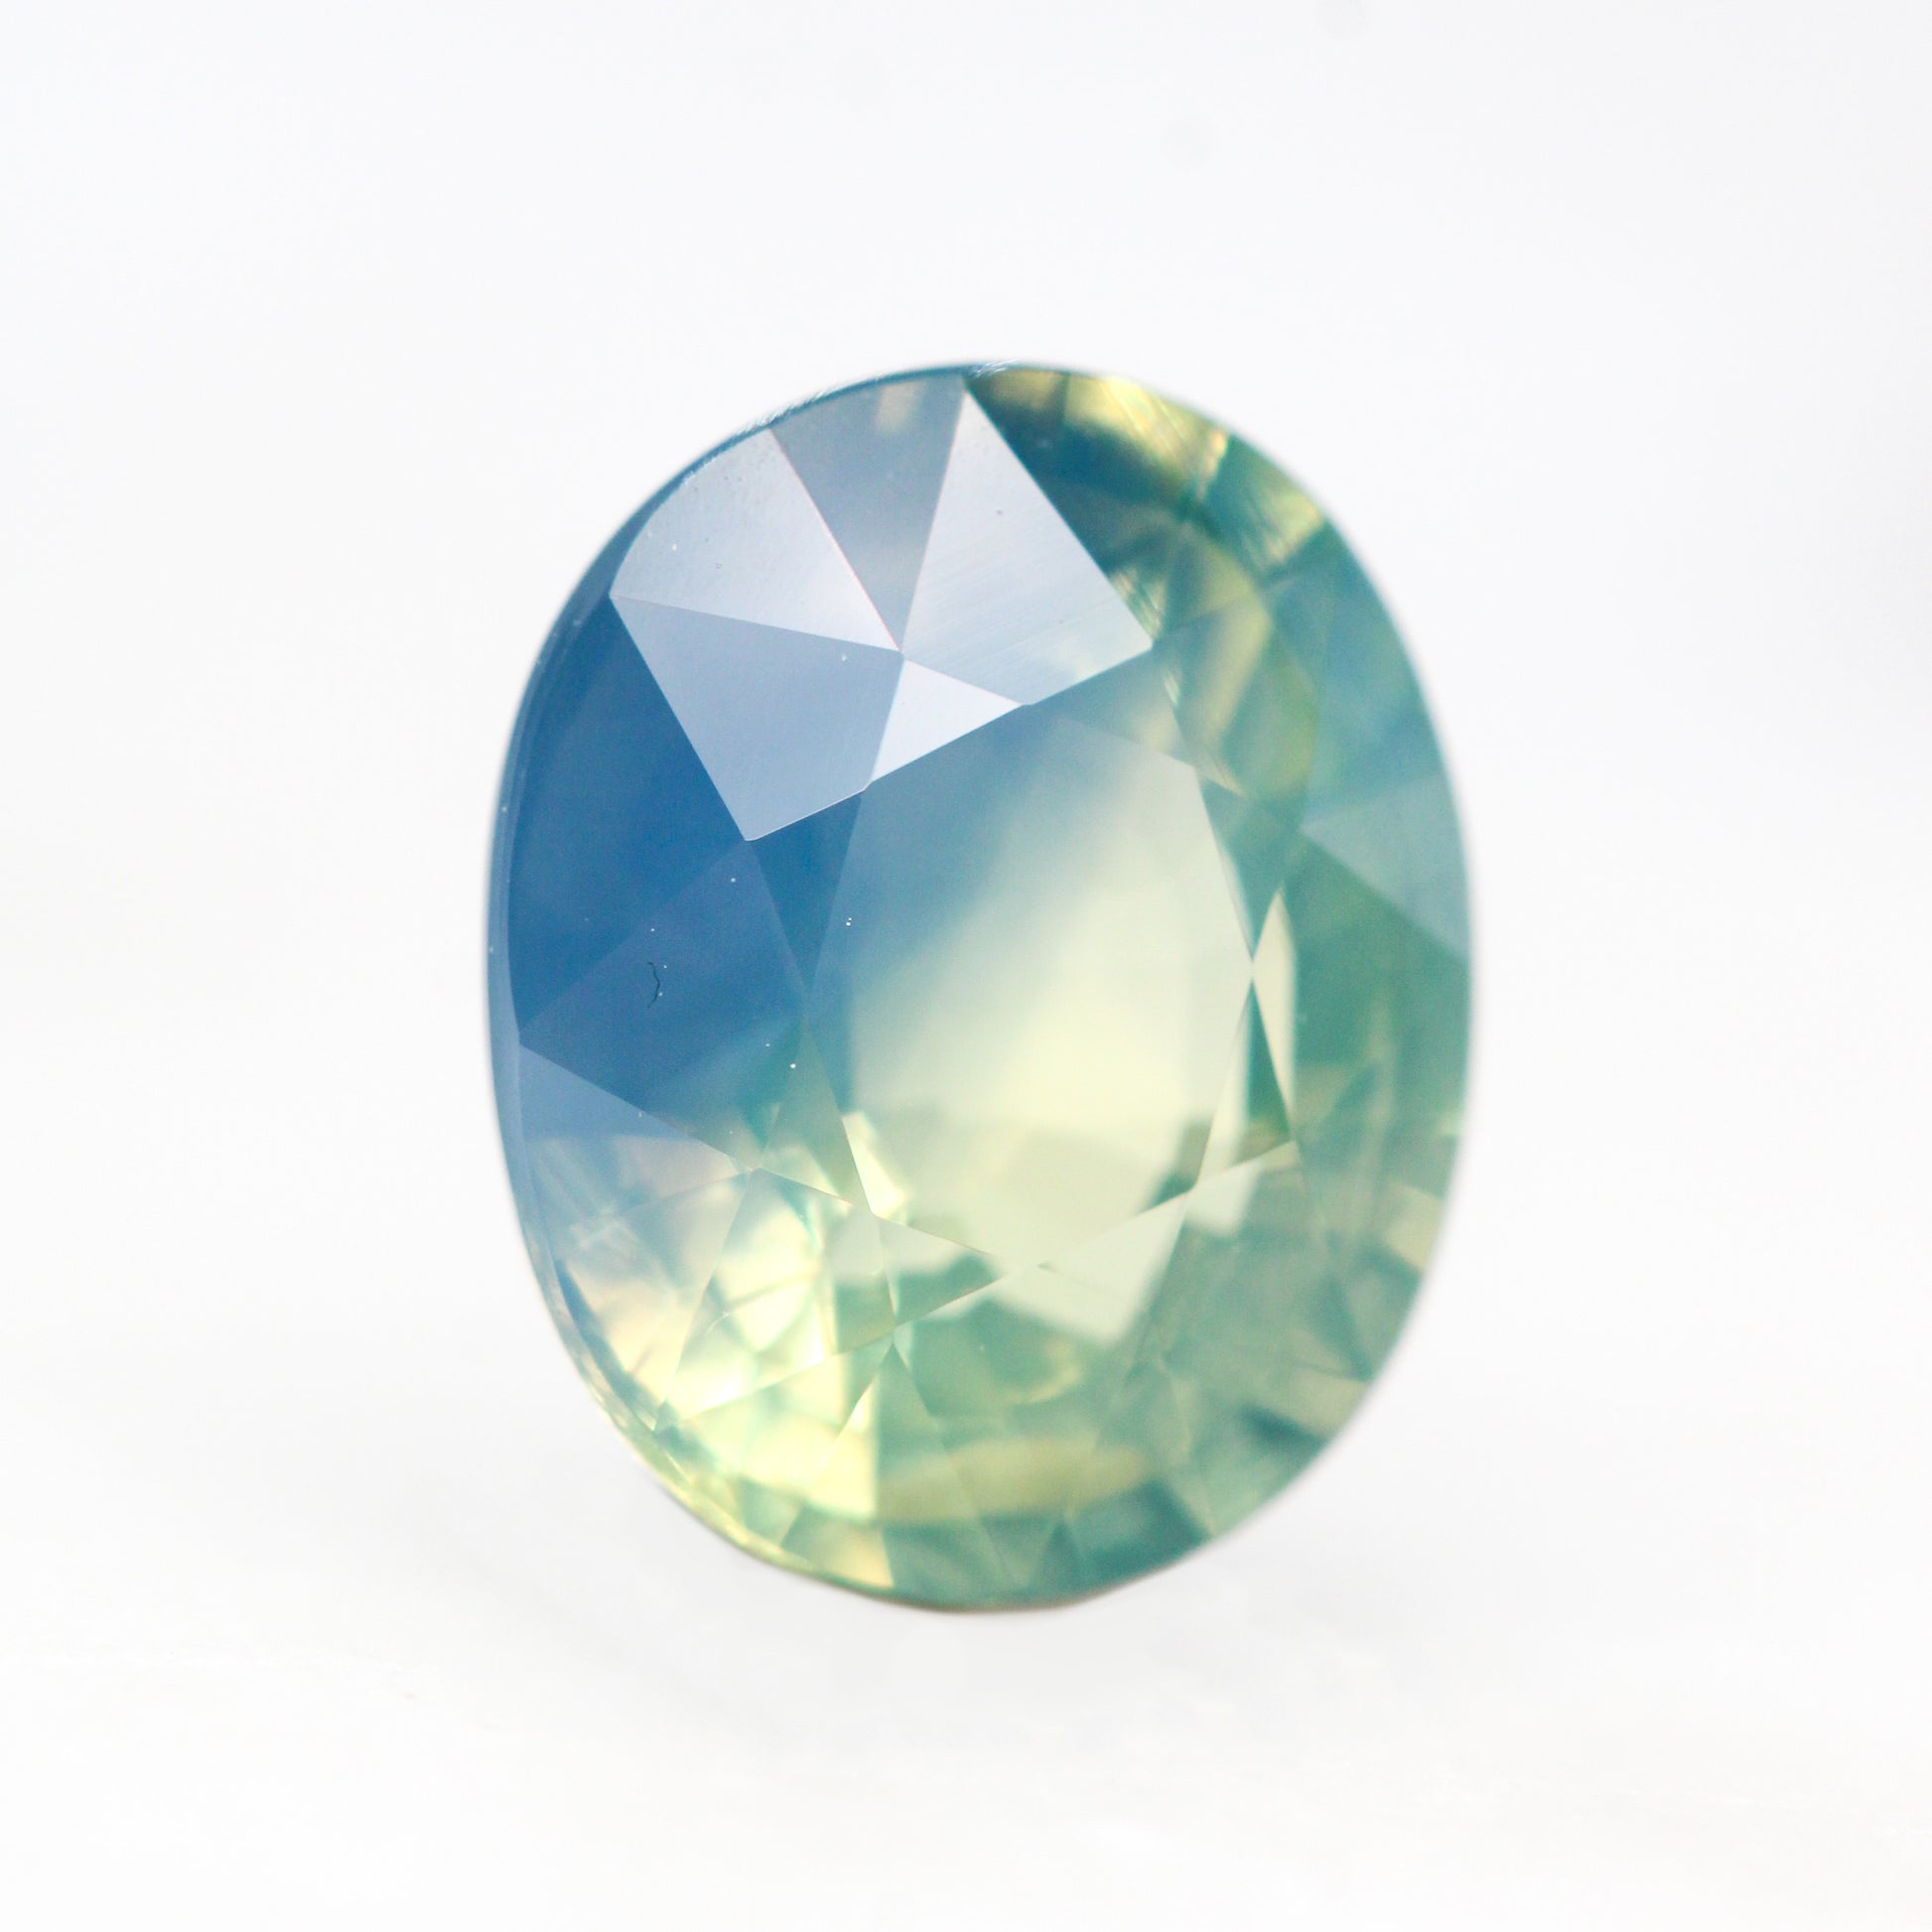 3.05 Carat Multicolor Green, Blue and Yellow Opalescent Oval Sapphire for Custom Work - Inventory Code MCOS305 - Midwinter Co. Alternative Bridal Rings and Modern Fine Jewelry